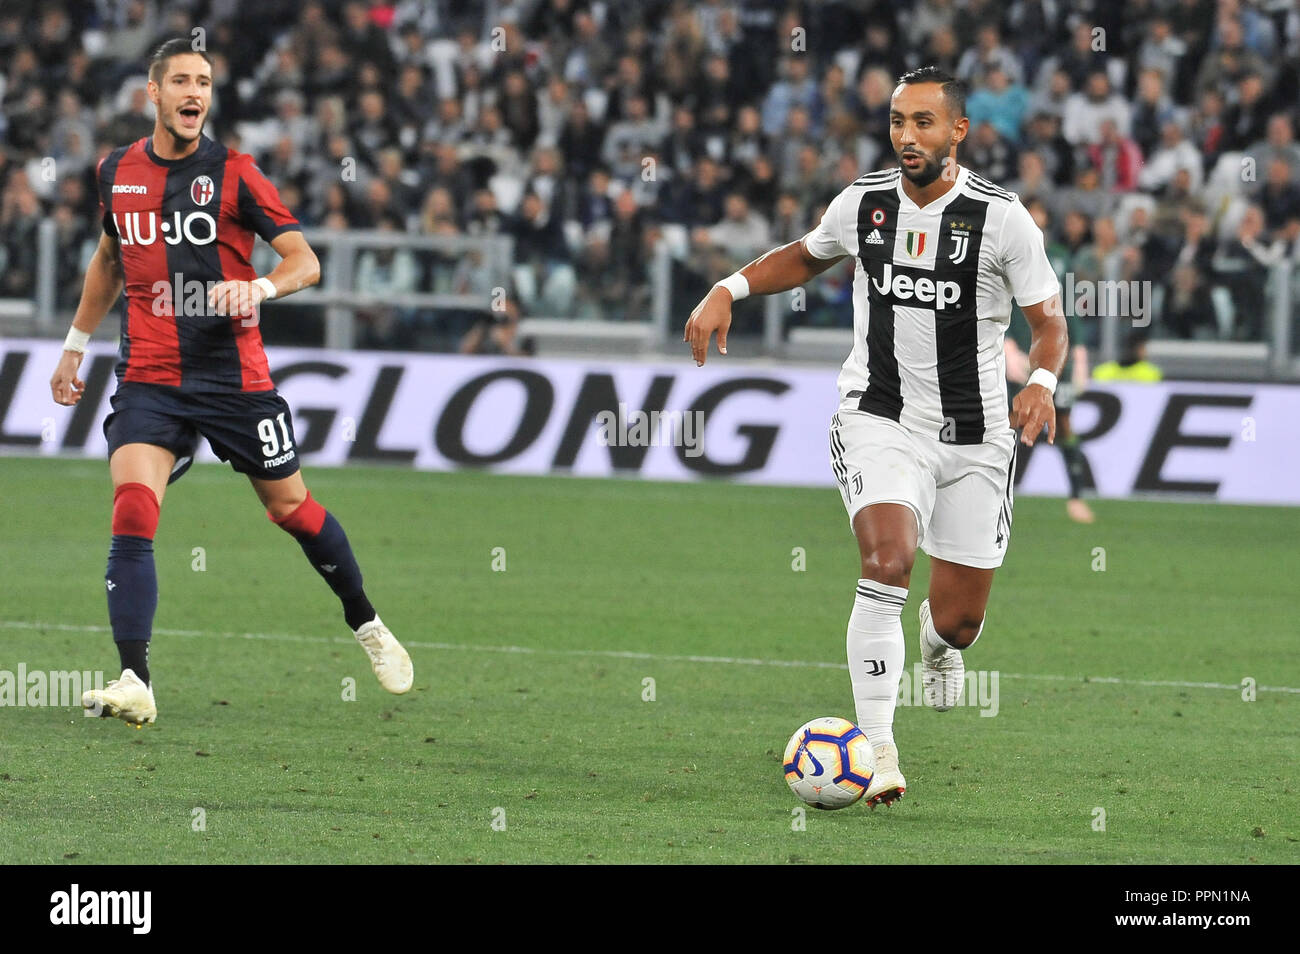 Turin, Italy. 26th September, 2018. Medhi Benatia of Juventus FCduring the Serie A football match between Juventus FC and Bologna FC at Allianz Stadium on 26th September, 2018 in Turin, Italy. Credit: FABIO PETROSINO/Alamy Live News Stock Photo